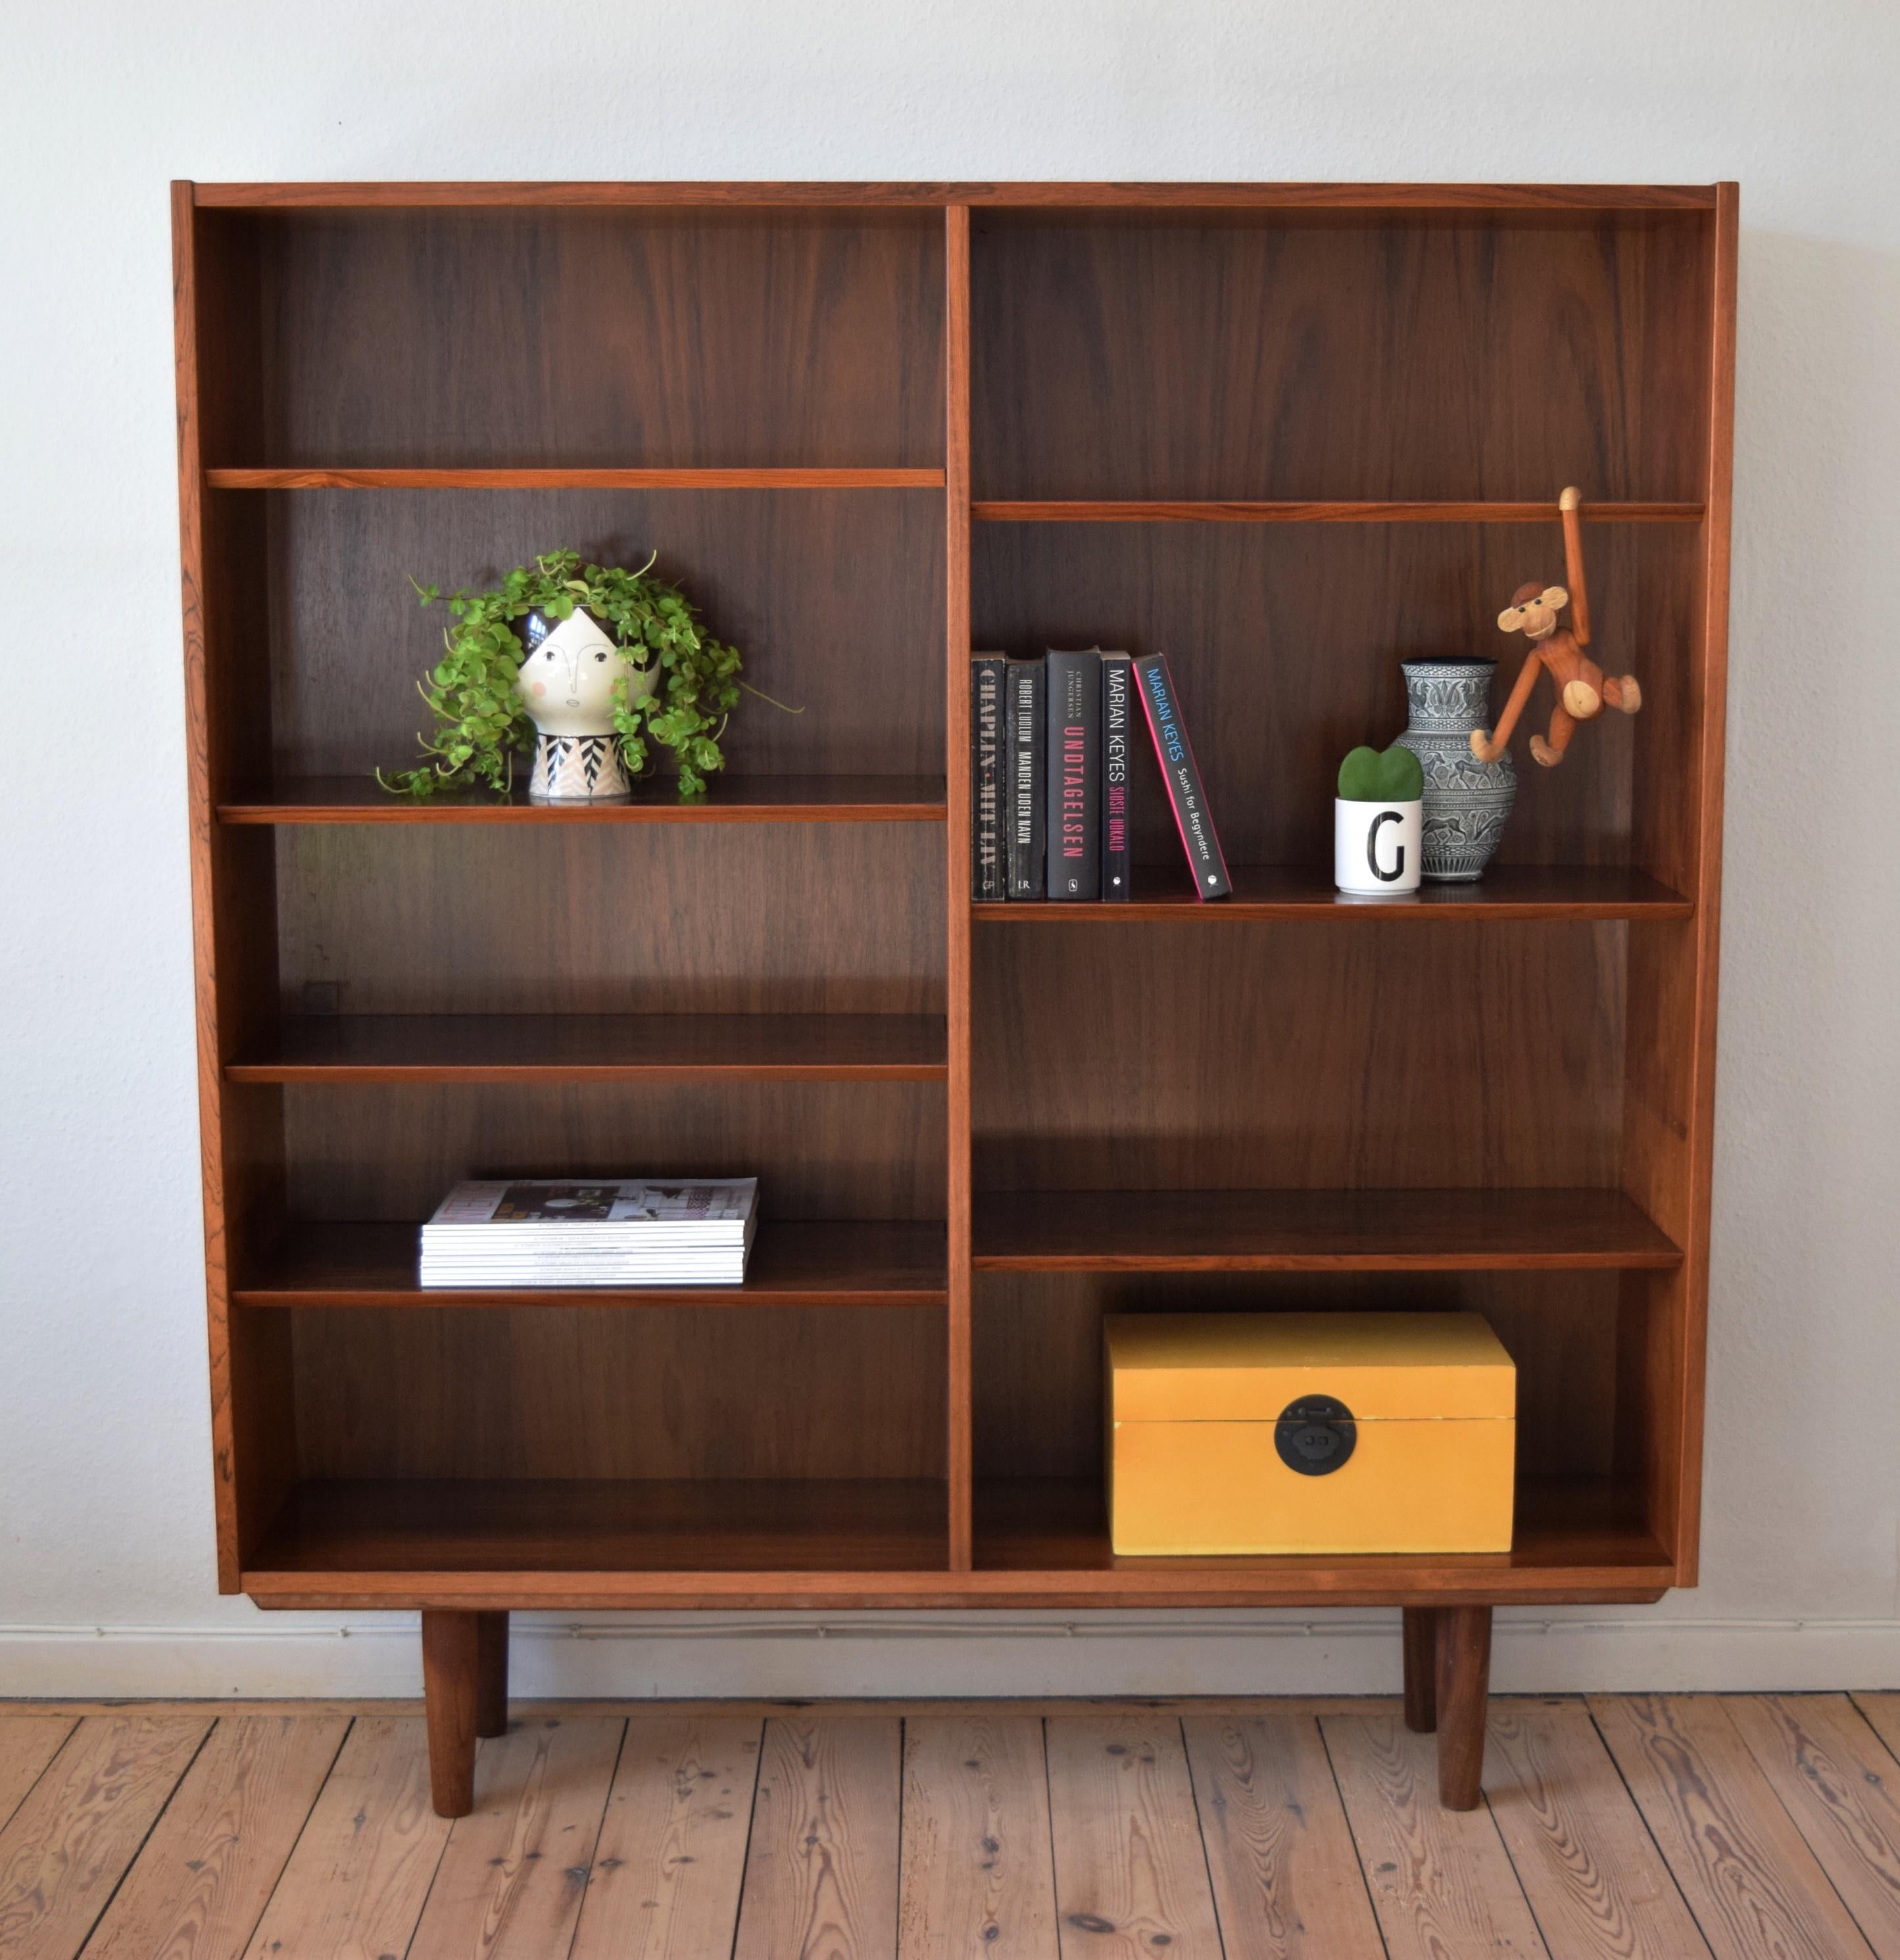 Rosewood bookshelf manufactured in Denmark by Poul Hundevad. Features adjustable shelves and sits on a frame base with teak legs. Very well made bookshelf from one of Denmark's foremost cabinet makers. Stunning rosewood grain throughout. Some